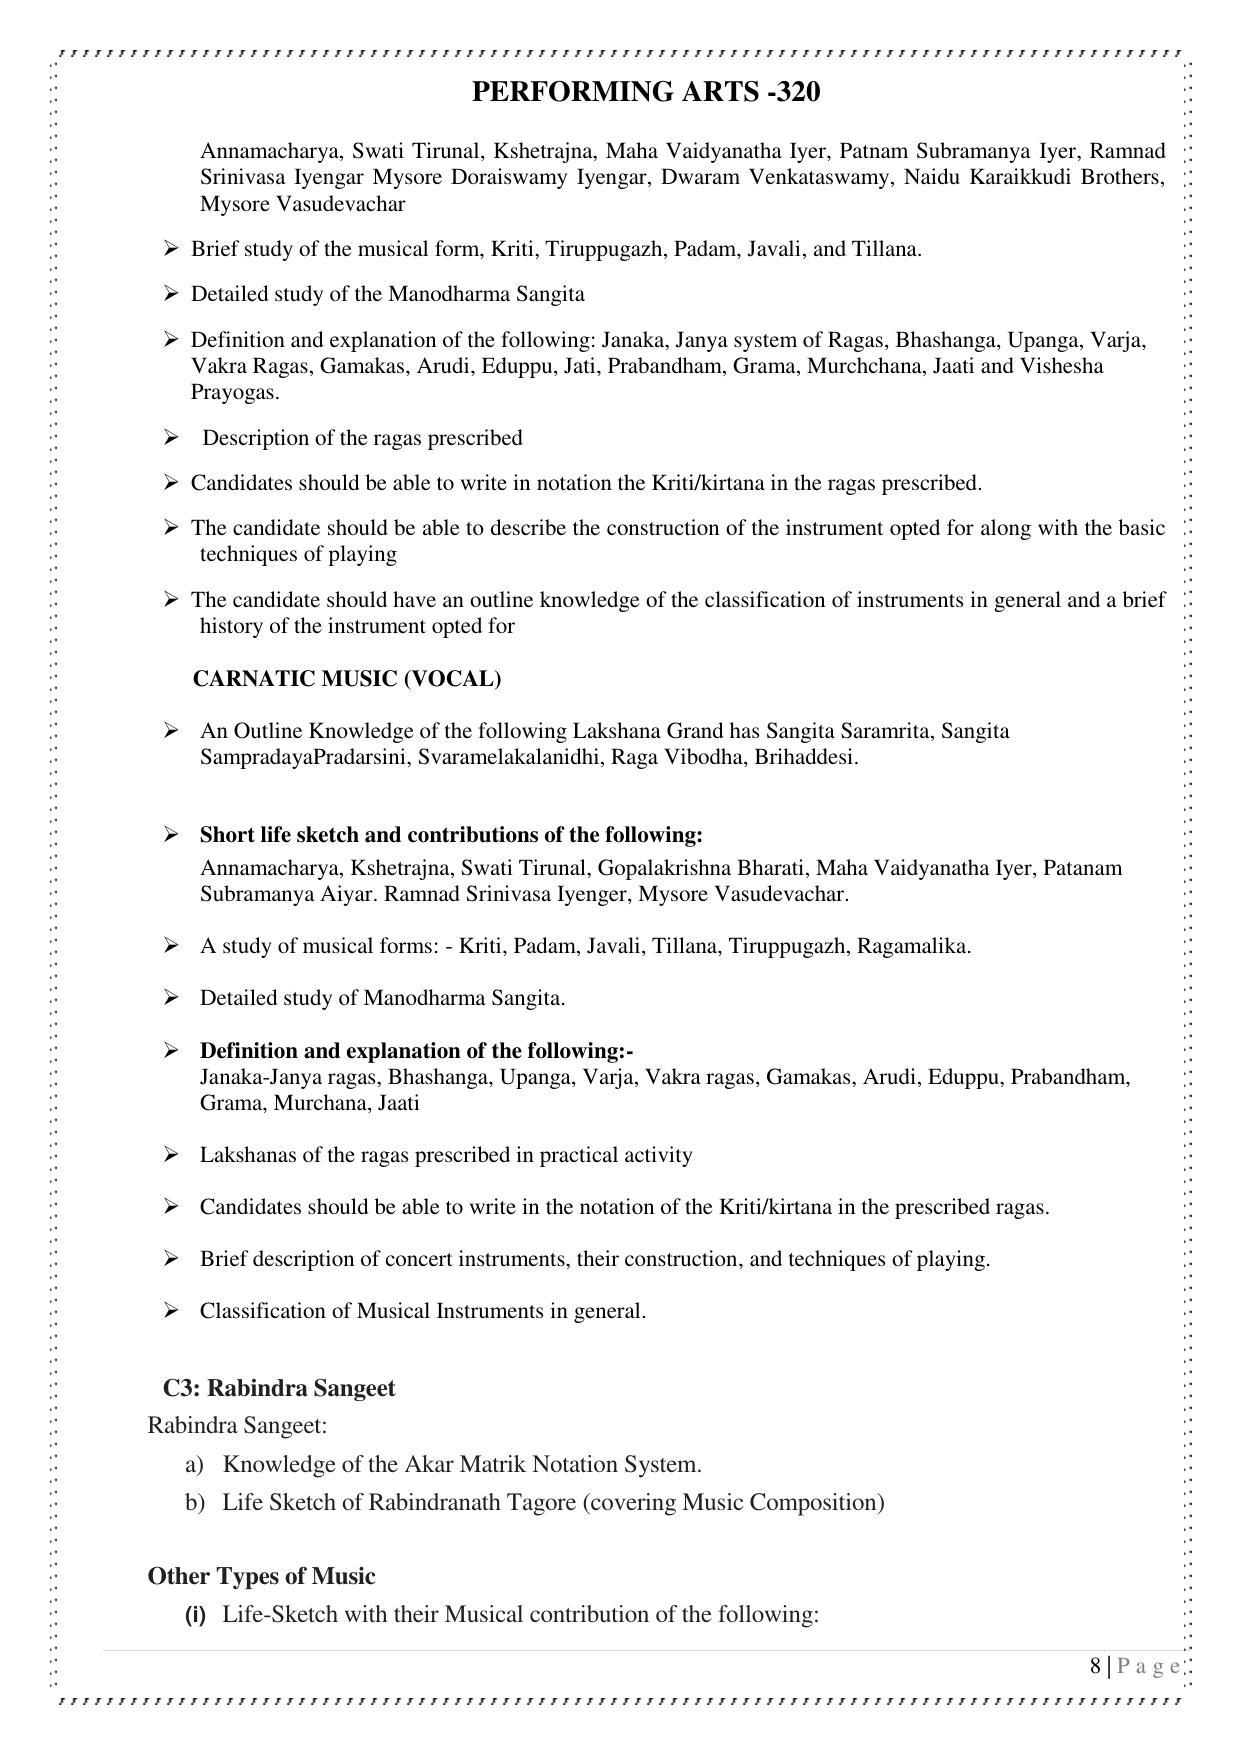 CUET Syllabus for Performing Arts (English) - Page 8